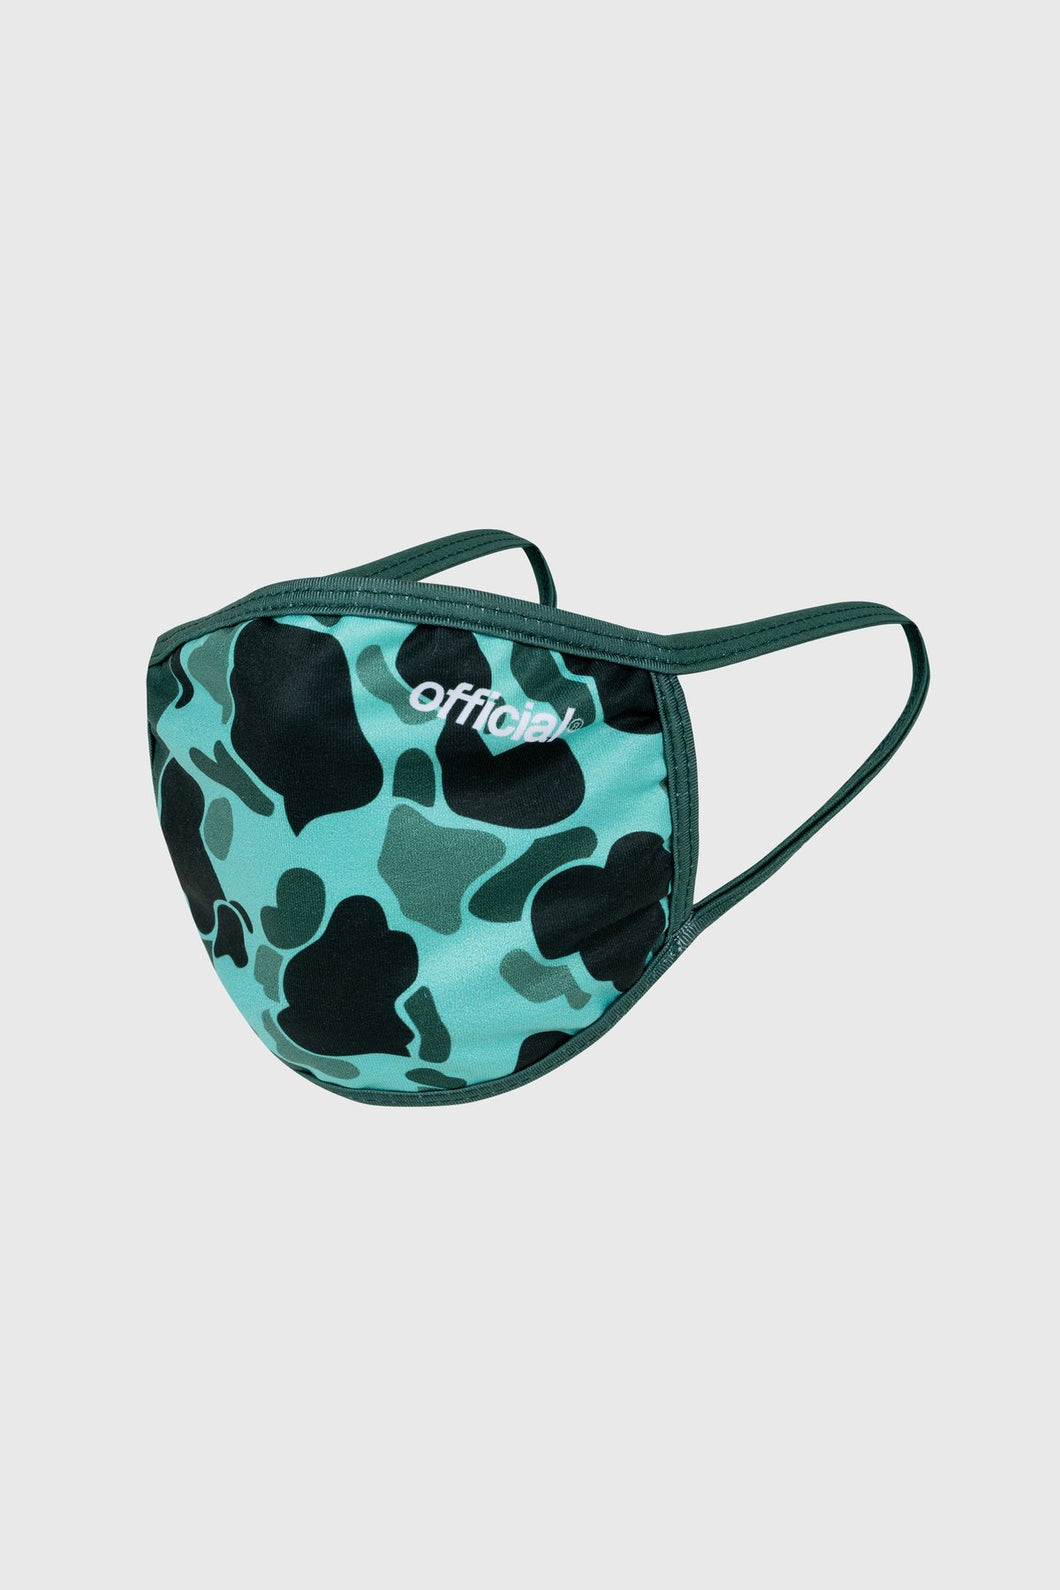 Official Face Mask Green Cammo